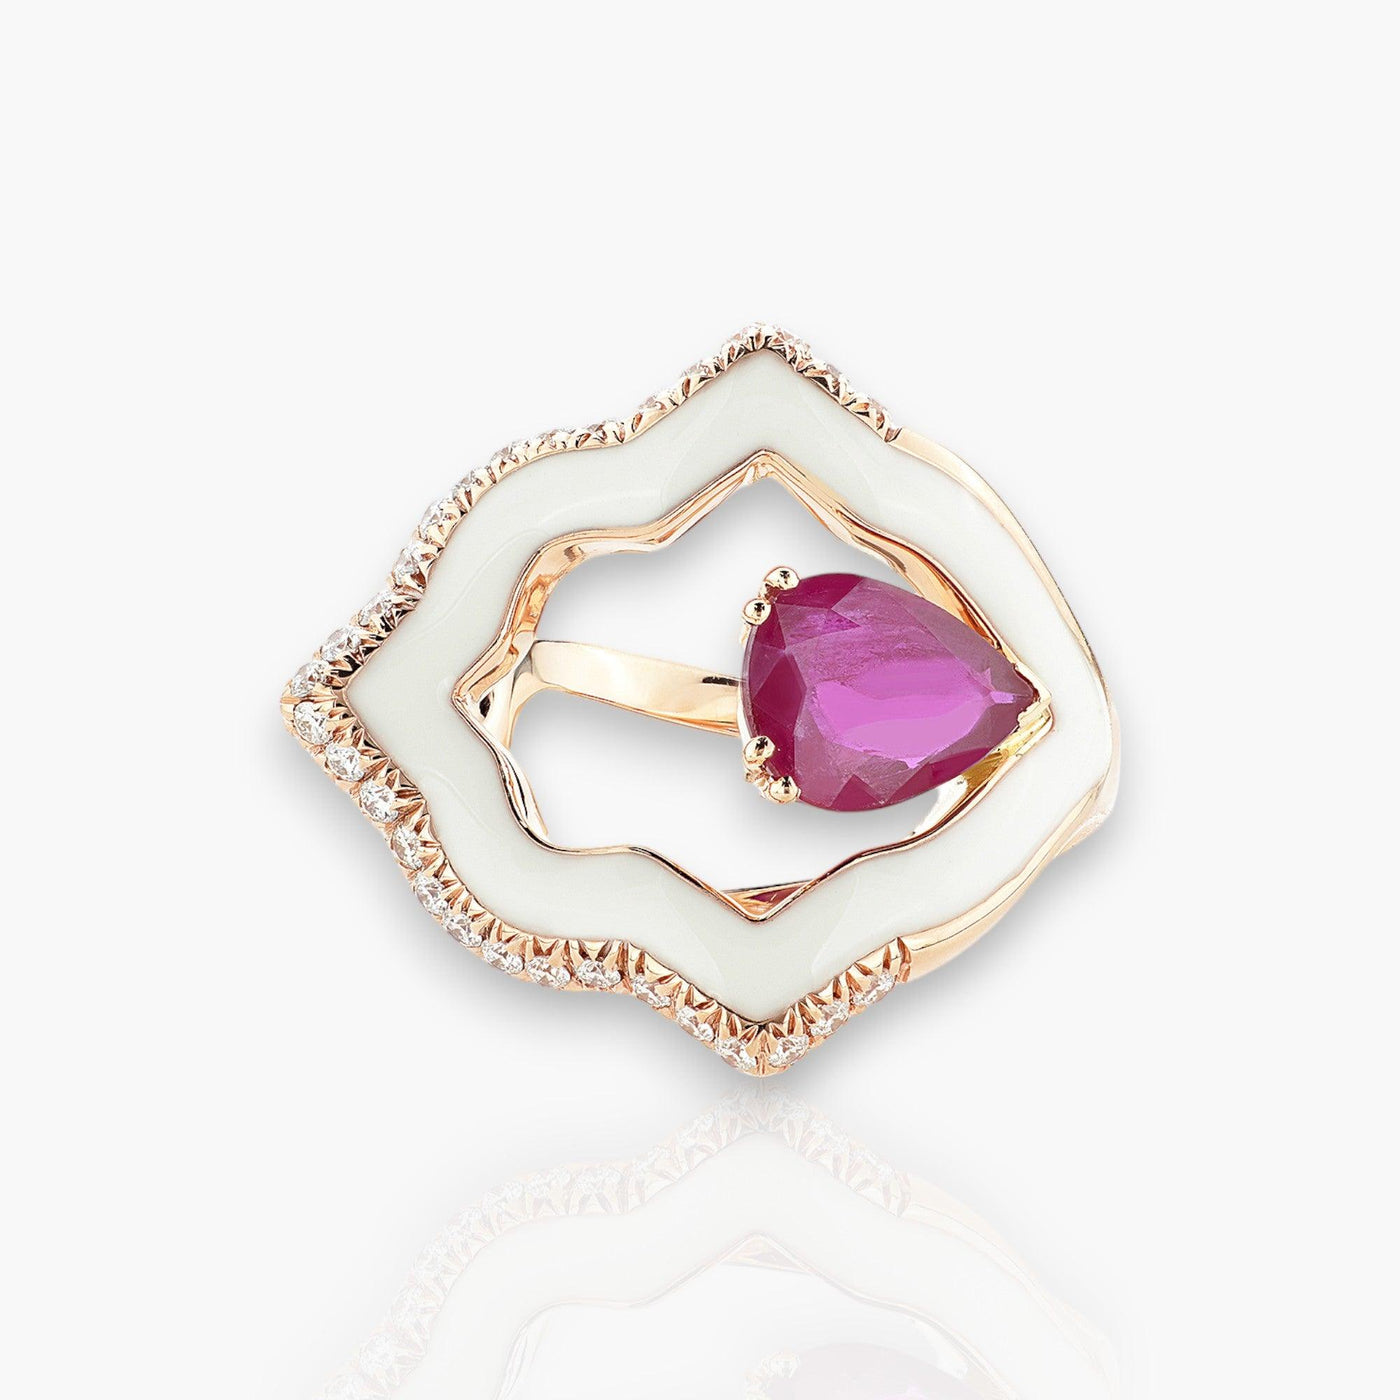 Anime Rock Ring with Ruby - Moregola Fine Jewelry